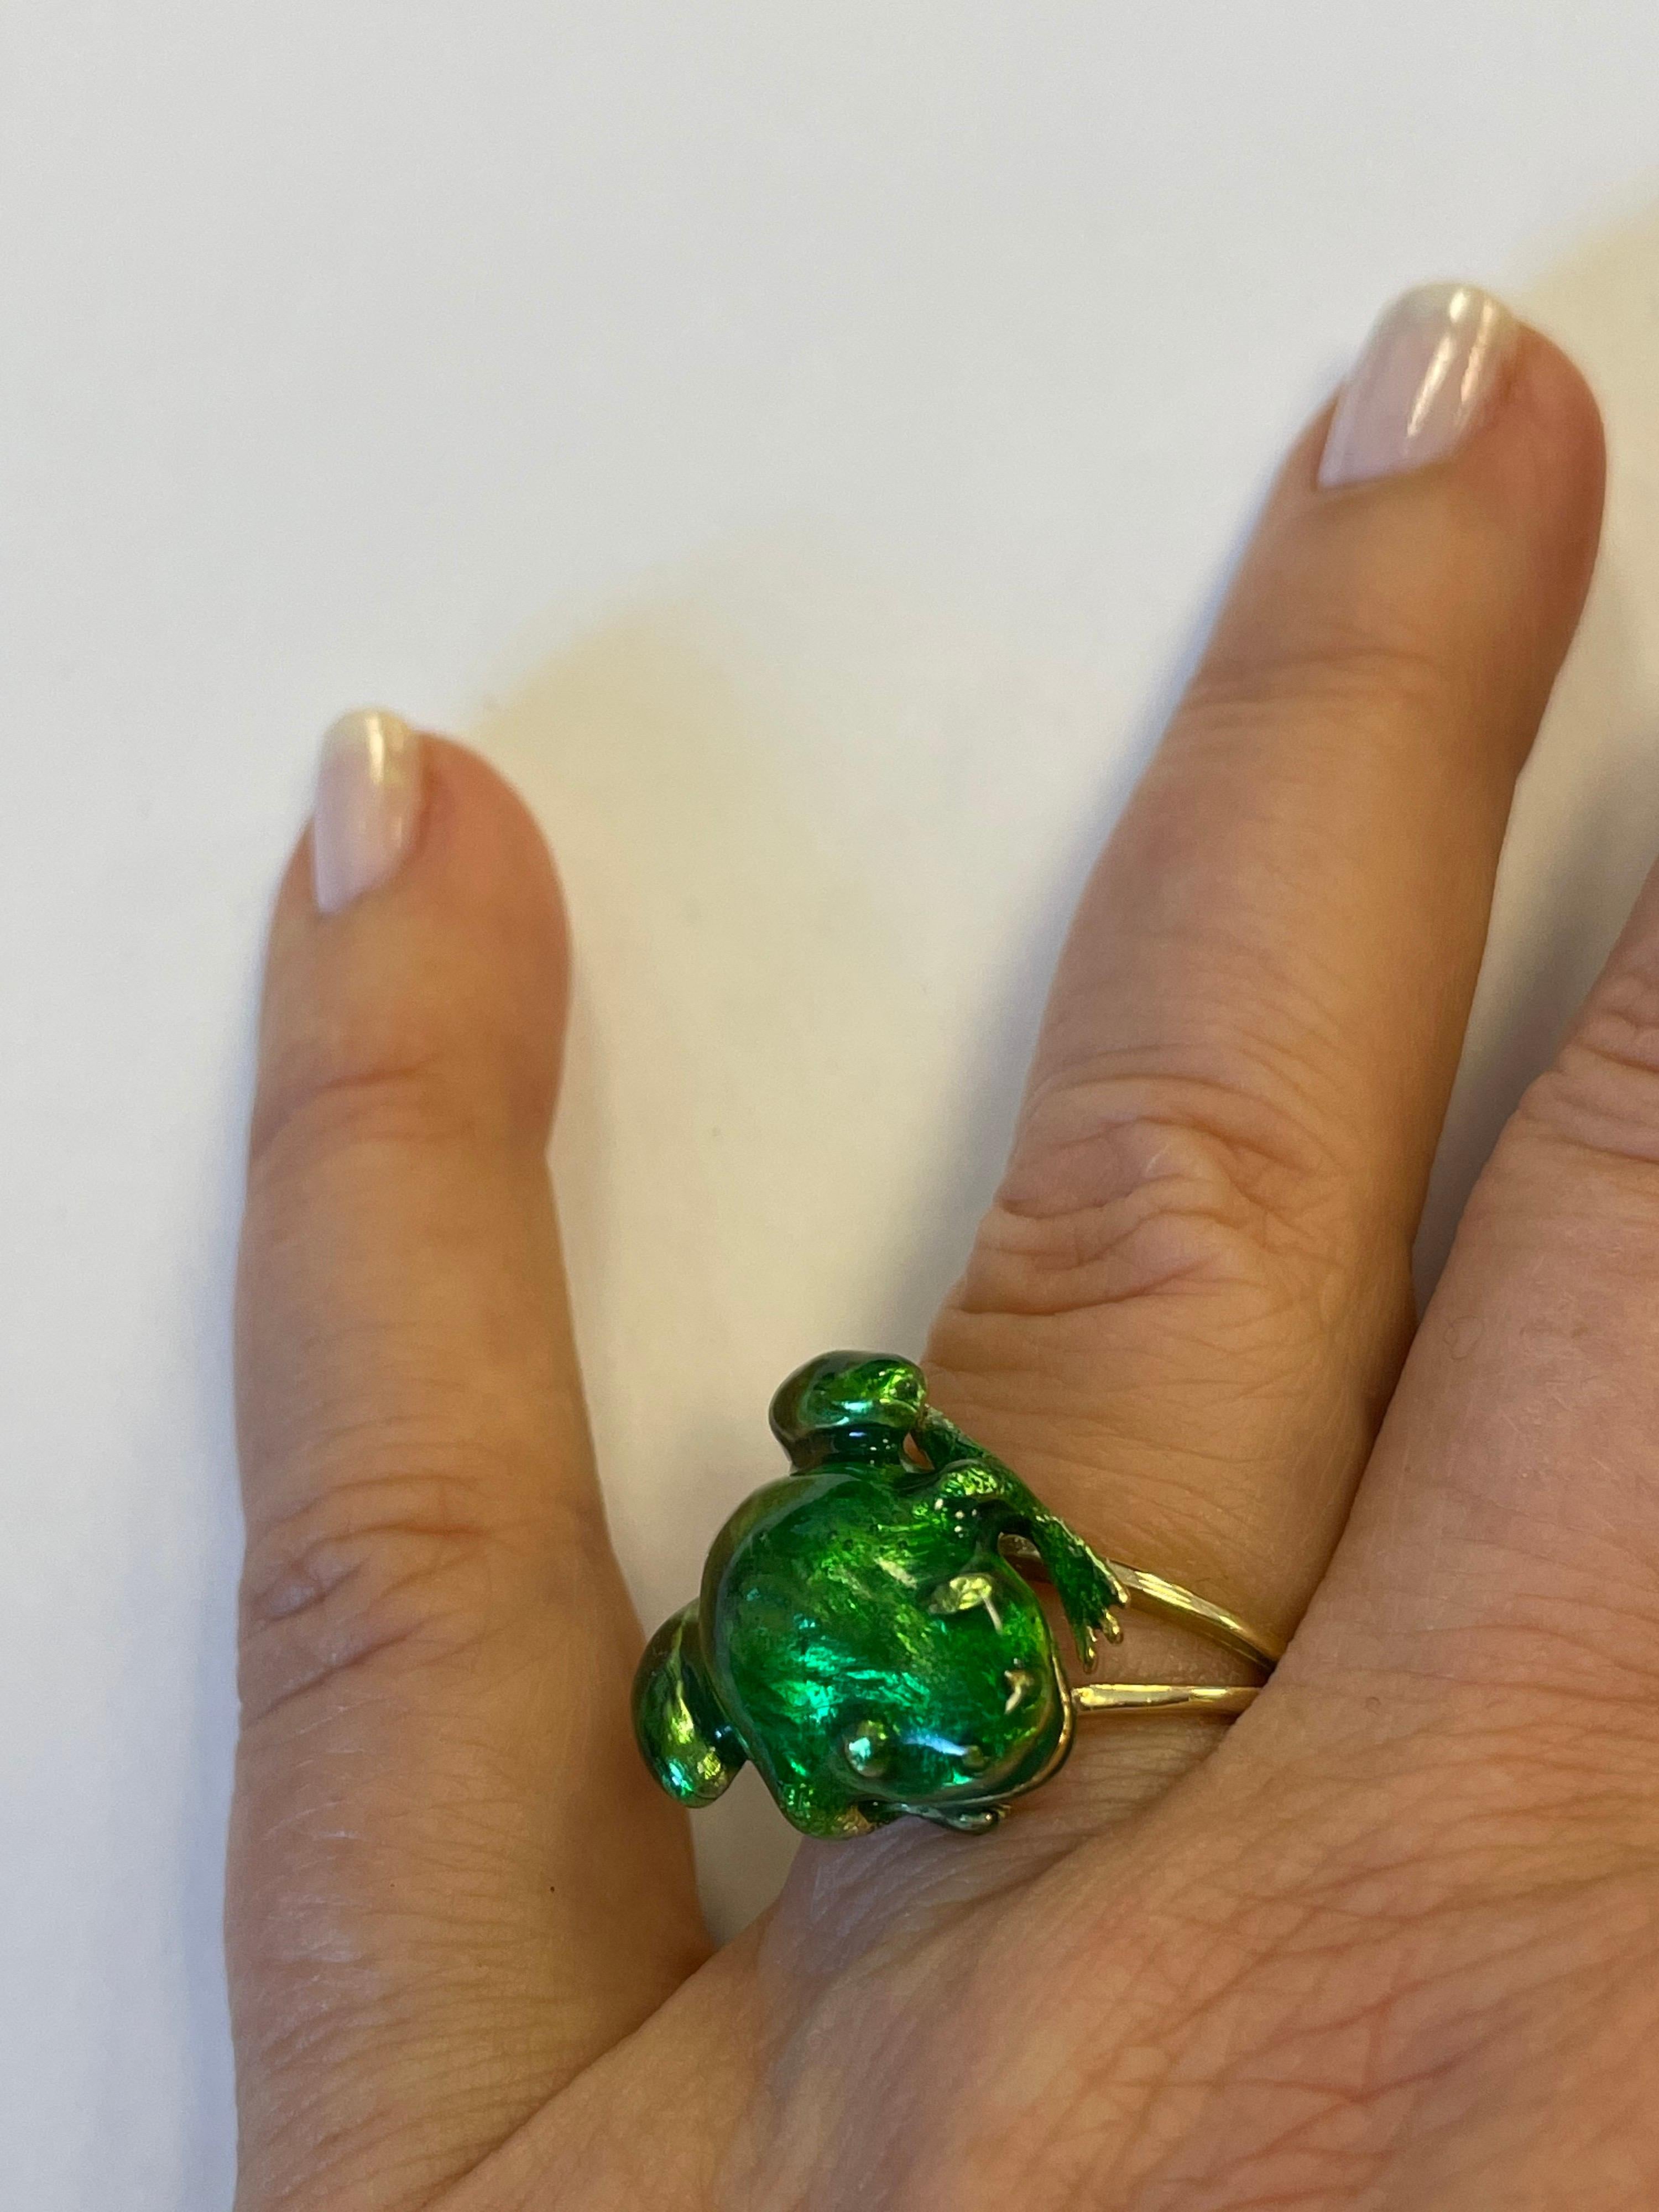 18K yellow gold split shank ring with green enamel frog
finger size 6.25, may be sized
retail $1500